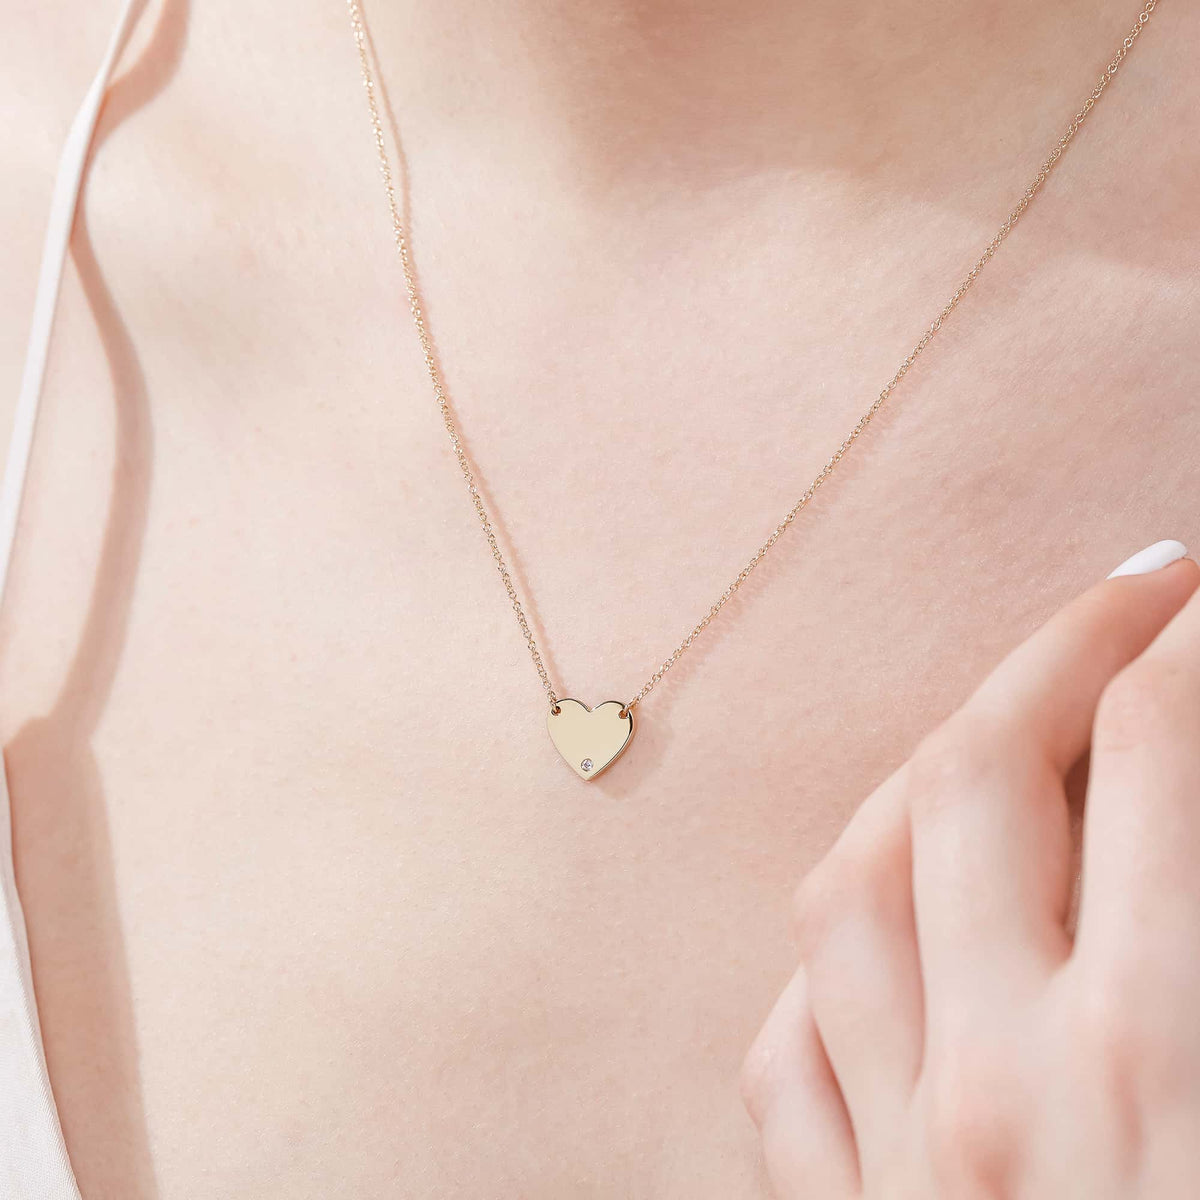 Engravable Heart Necklace - 14K Yellow Gold (RTS)